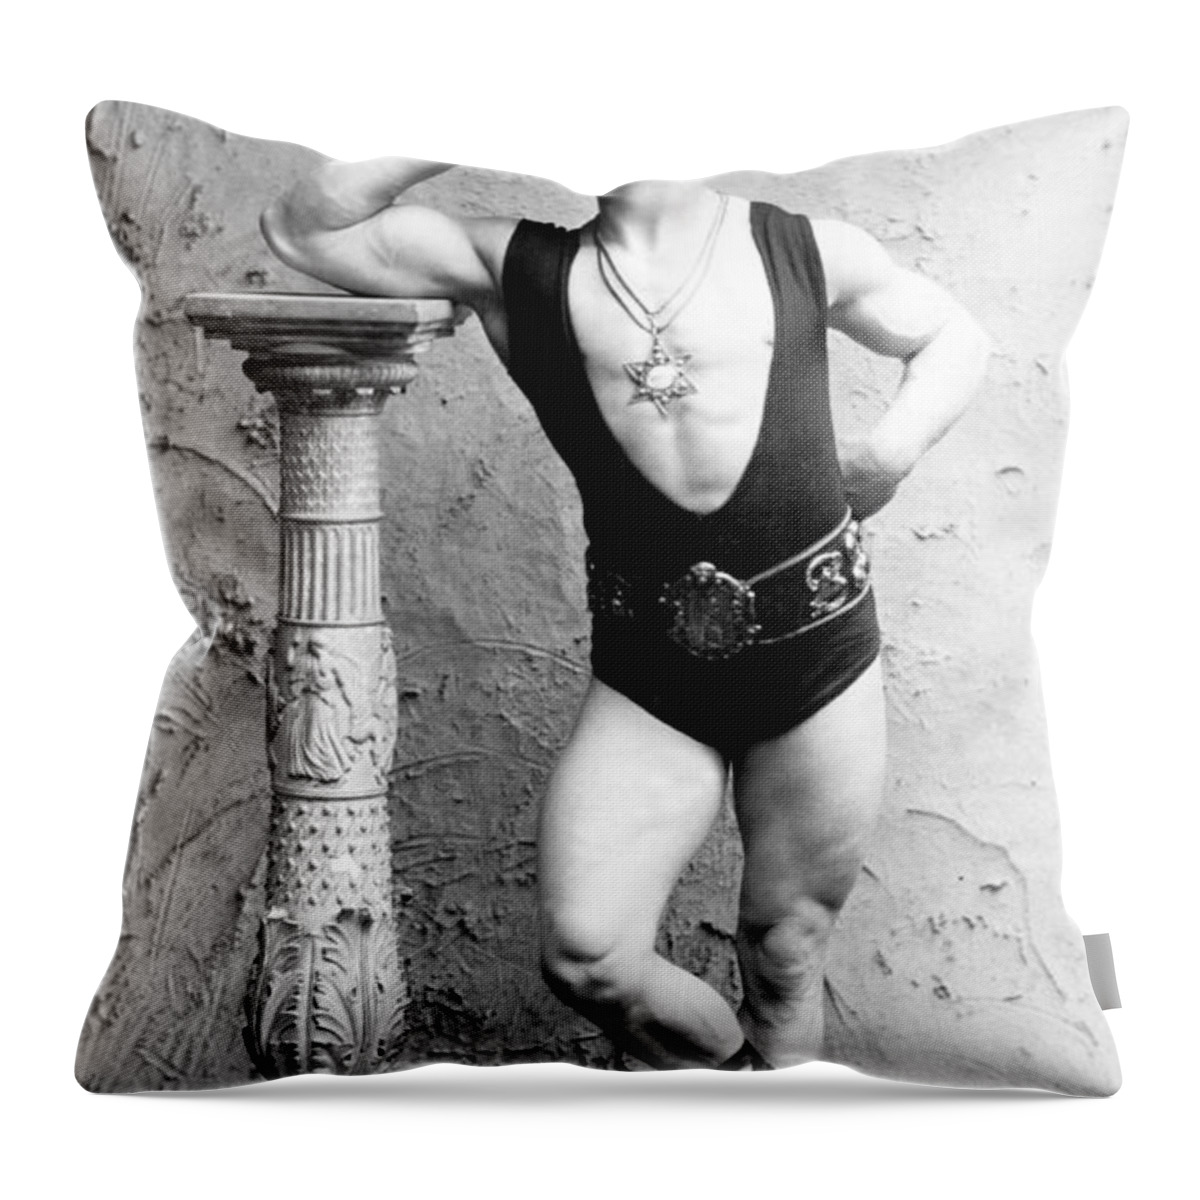 Erotica Throw Pillow featuring the photograph Eugen Sandow, Father Of Modern by Science Source